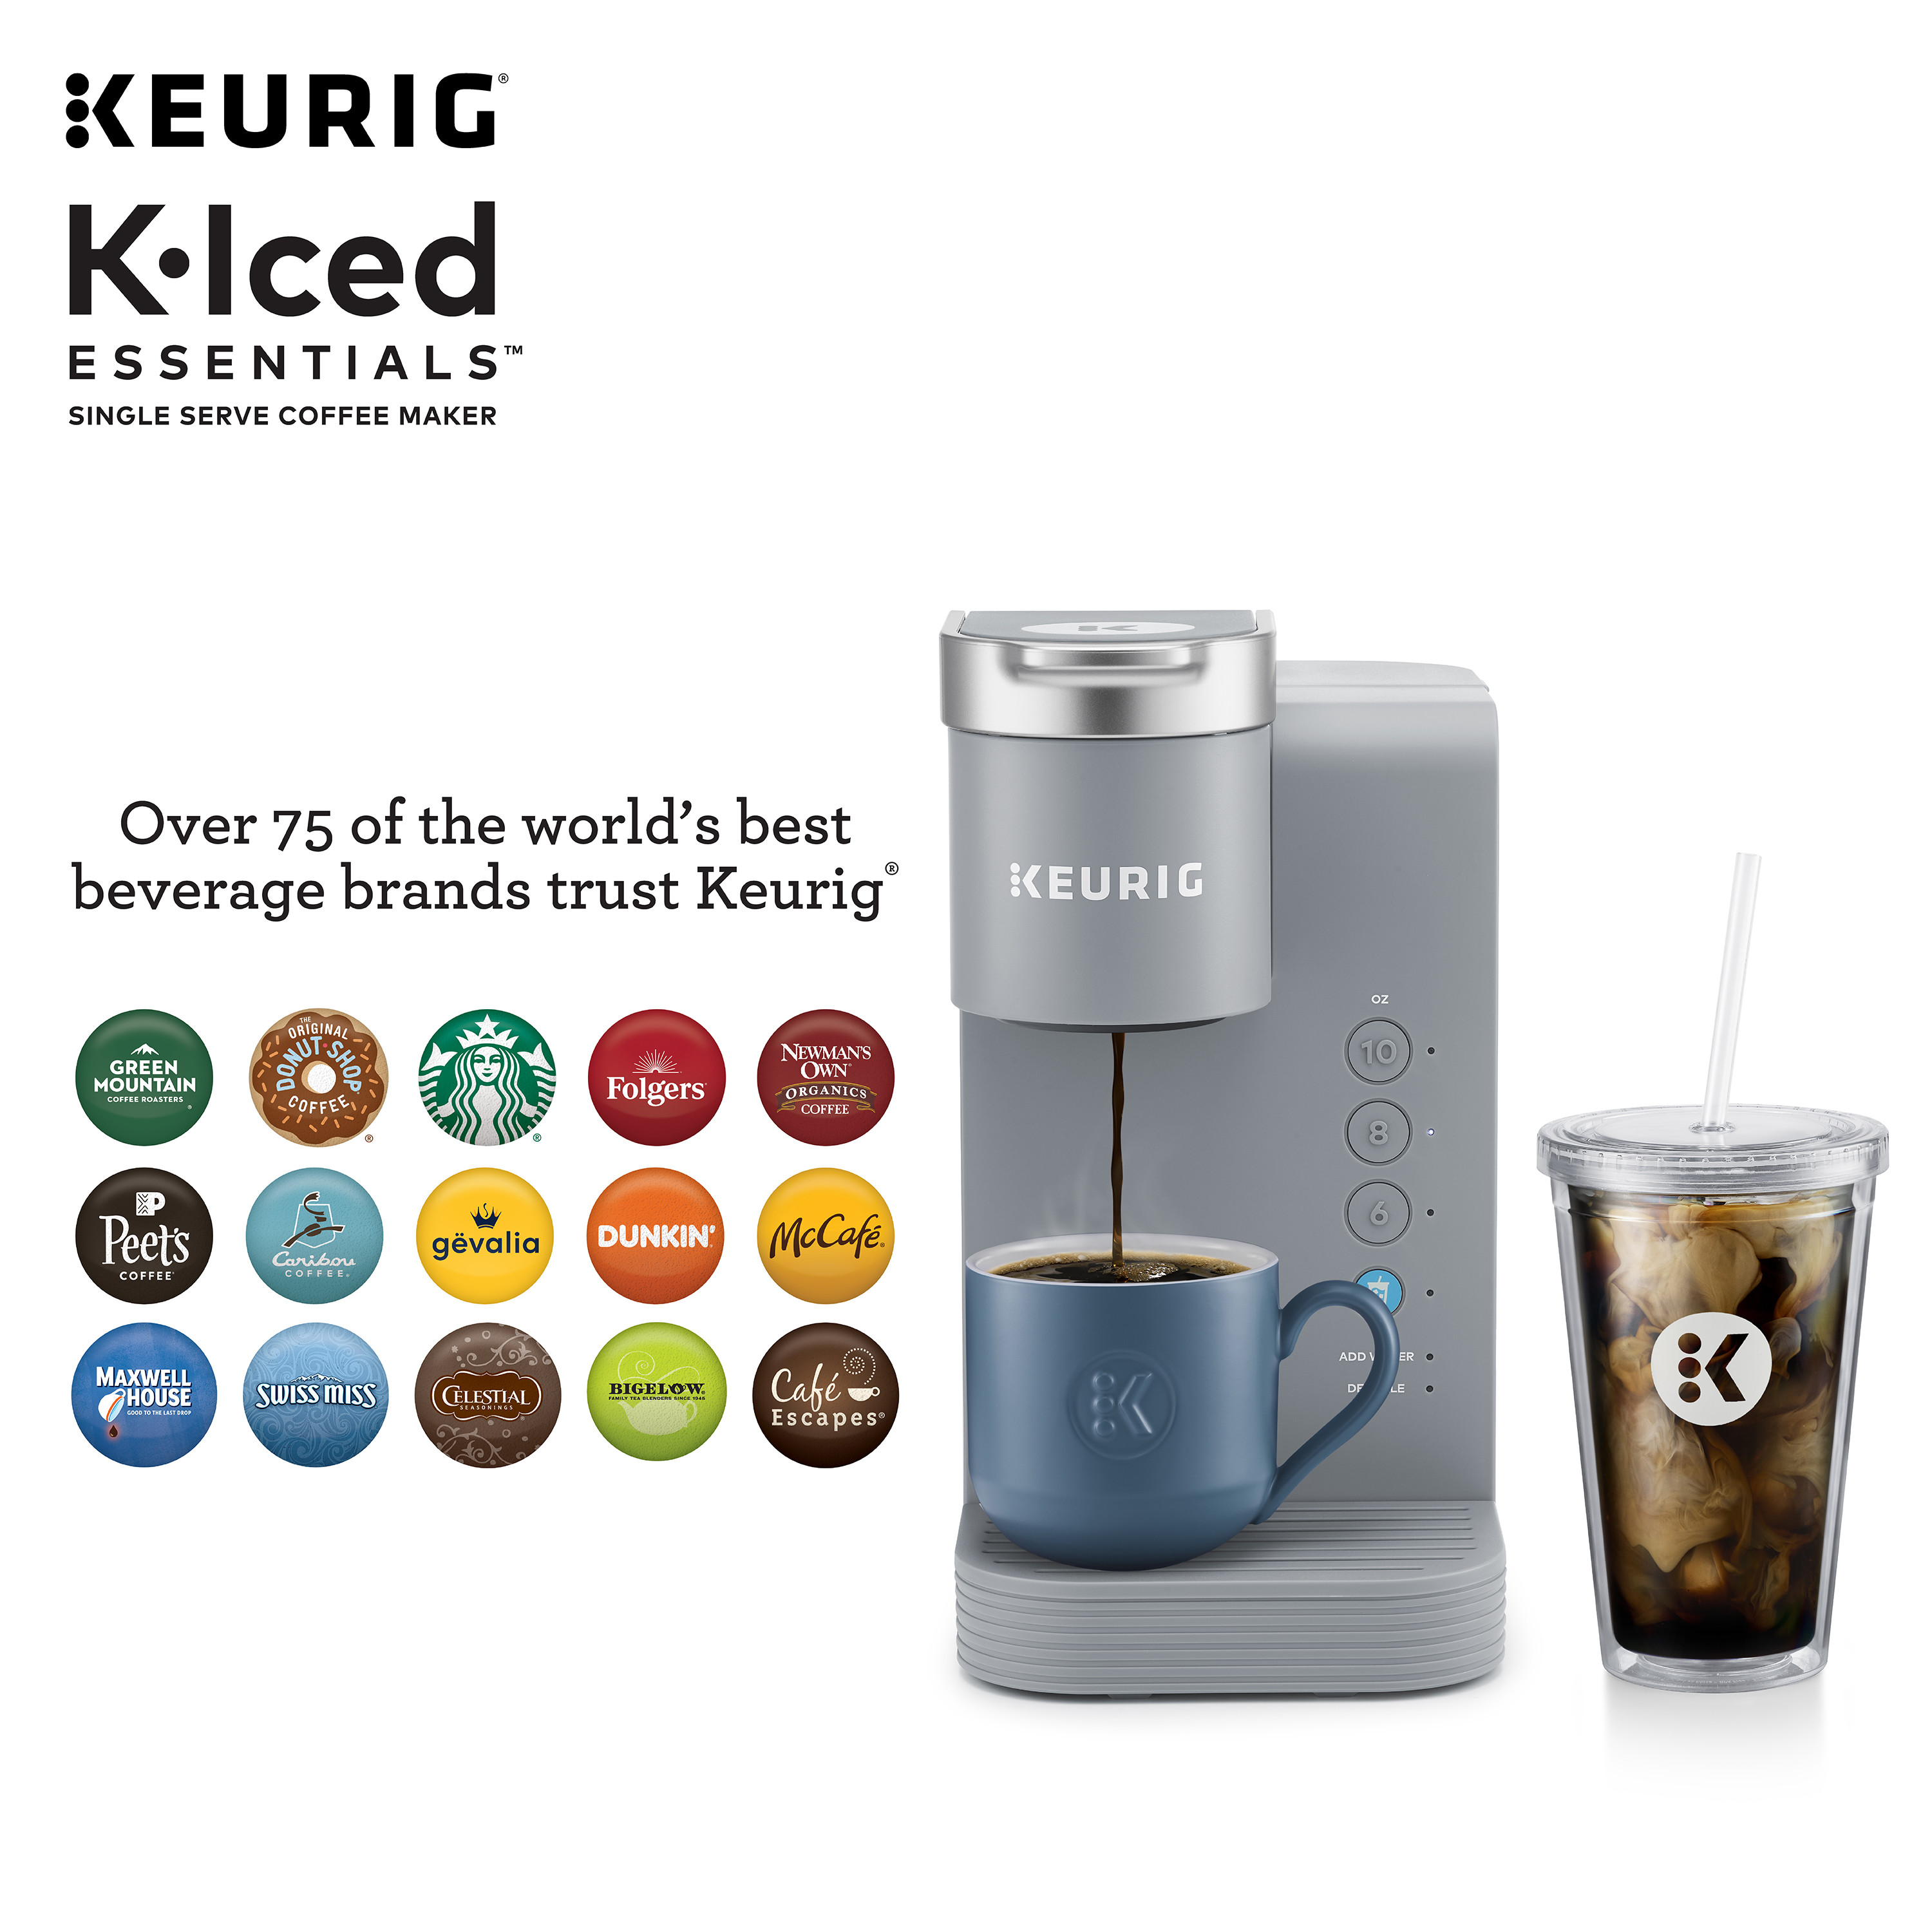 Keurig K-Iced Essentials Gray Iced and Hot Single-Serve K-Cup Pod Coffee Maker - image 5 of 16